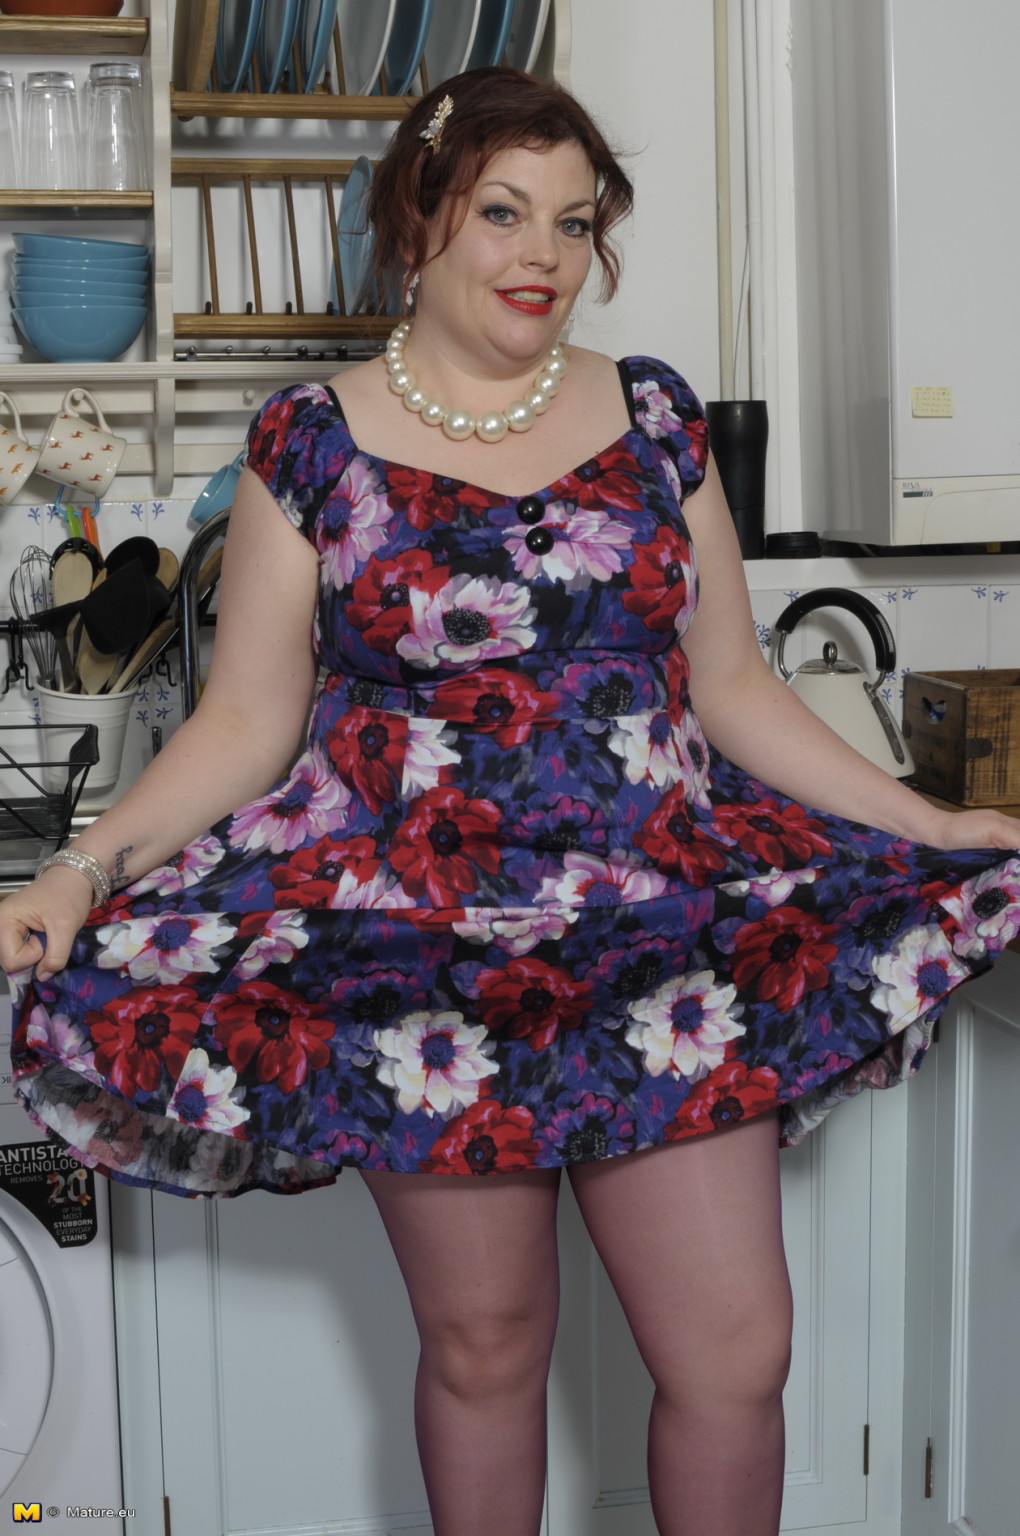 Chubby British housewife playing in her kitchen #67119126